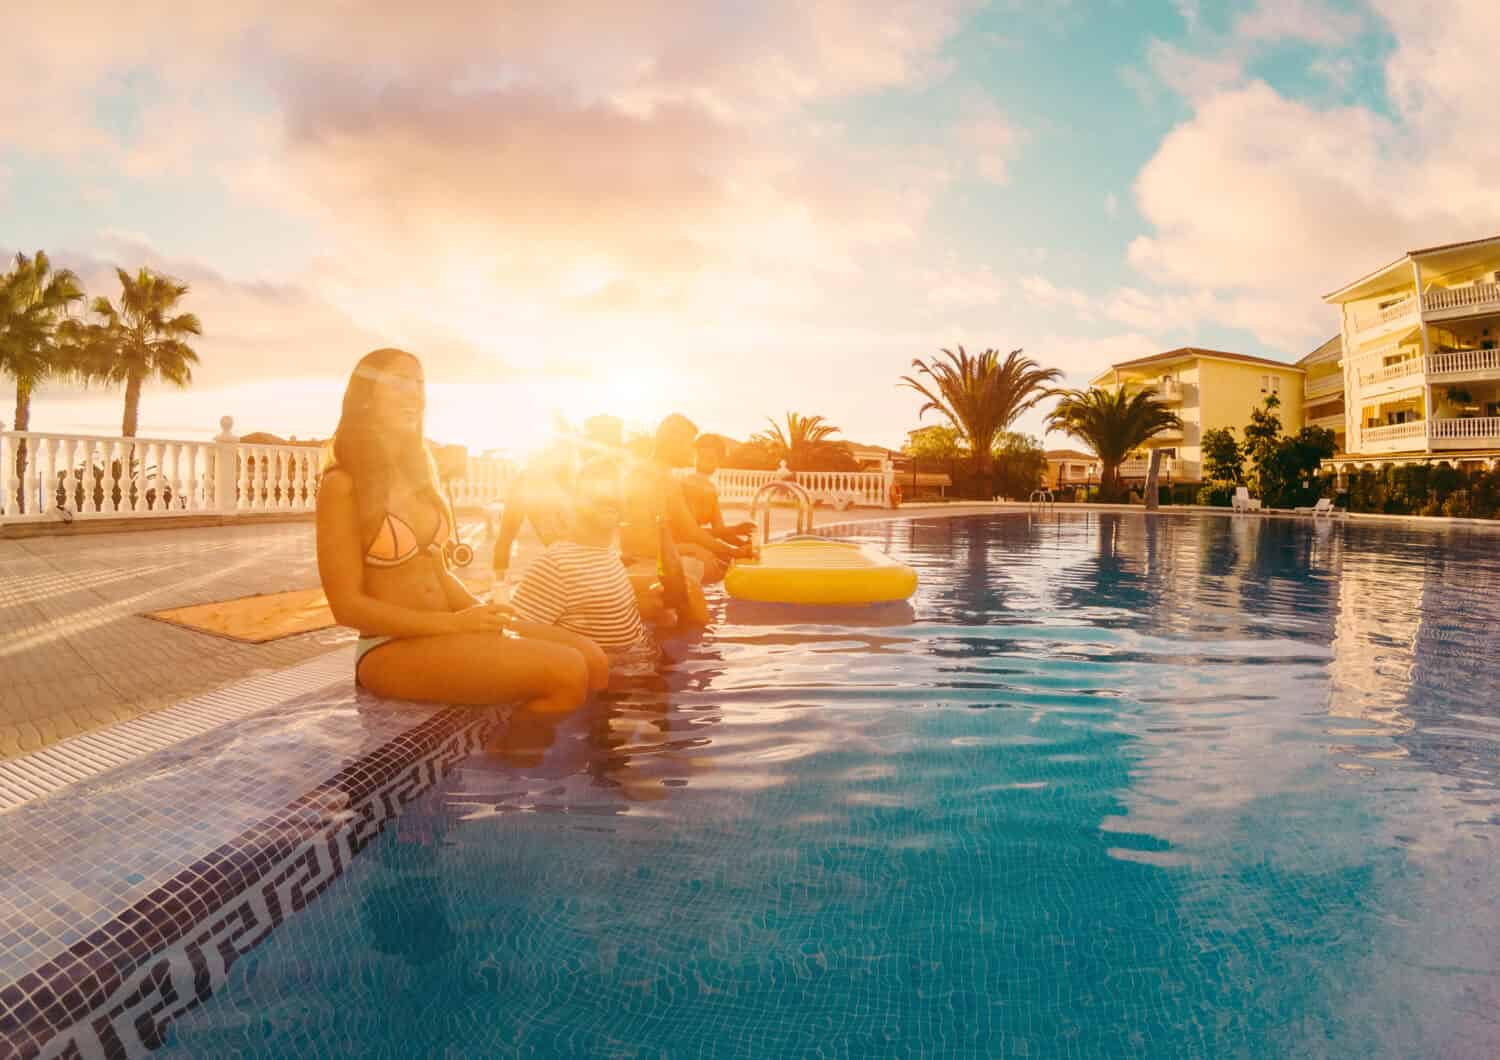 Happy friends drinking champagne in pool party at sunset - Rich people having fun in exclusive tropical vacation - Summer holiday, youth lifestyle and friendship concept